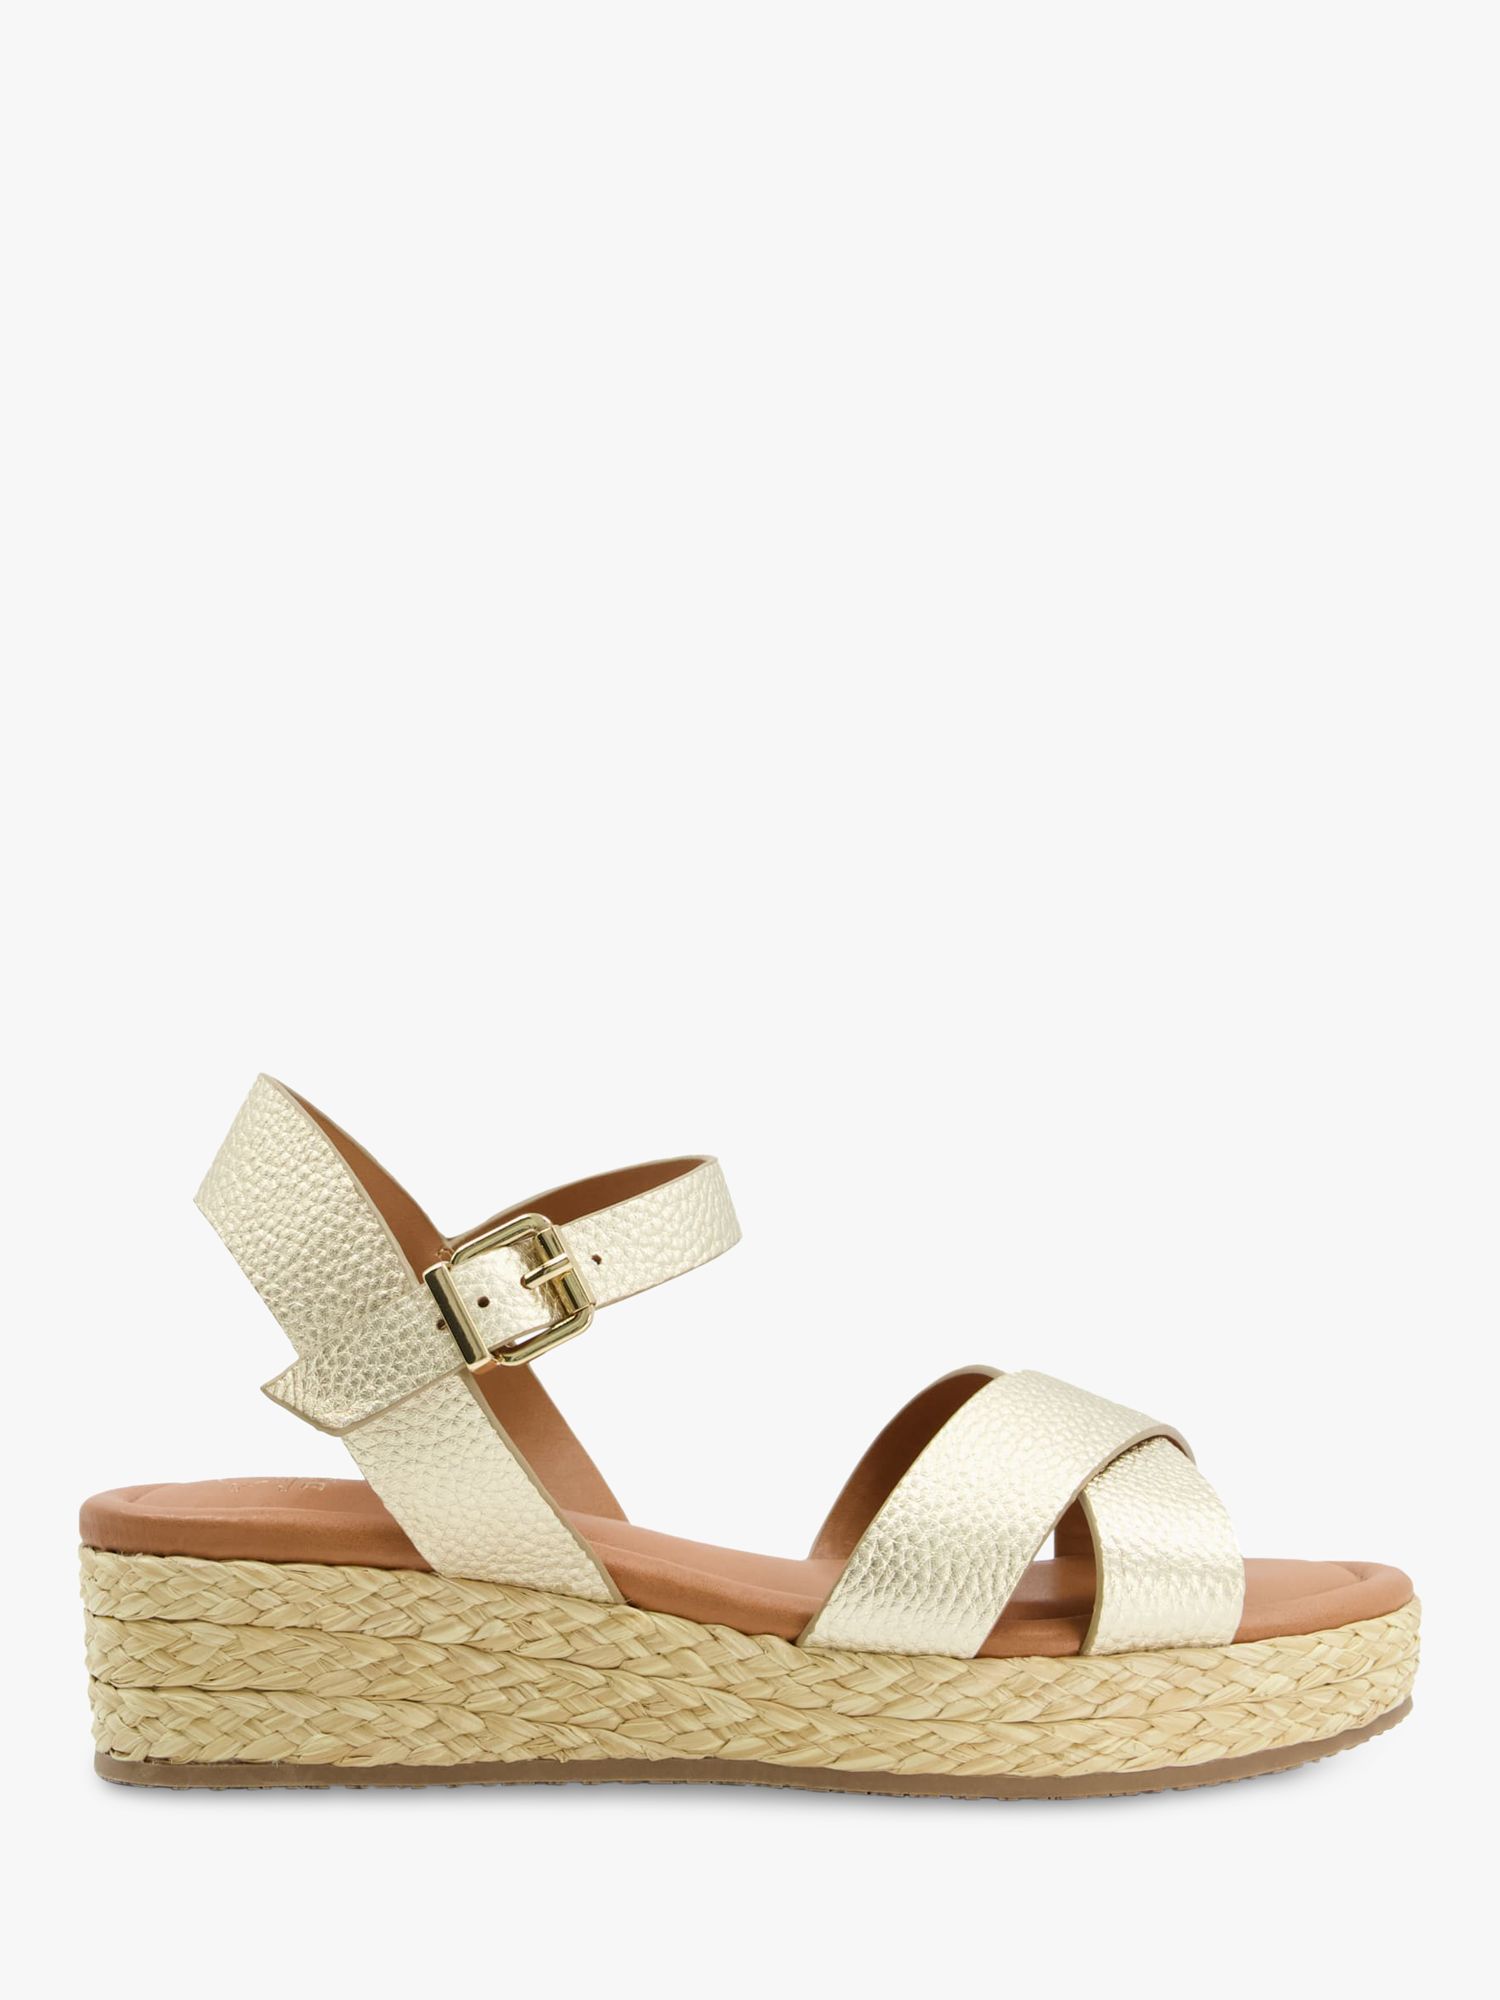 Dune Linnie Leather Cross Strap Sandals, Gold at John Lewis & Partners